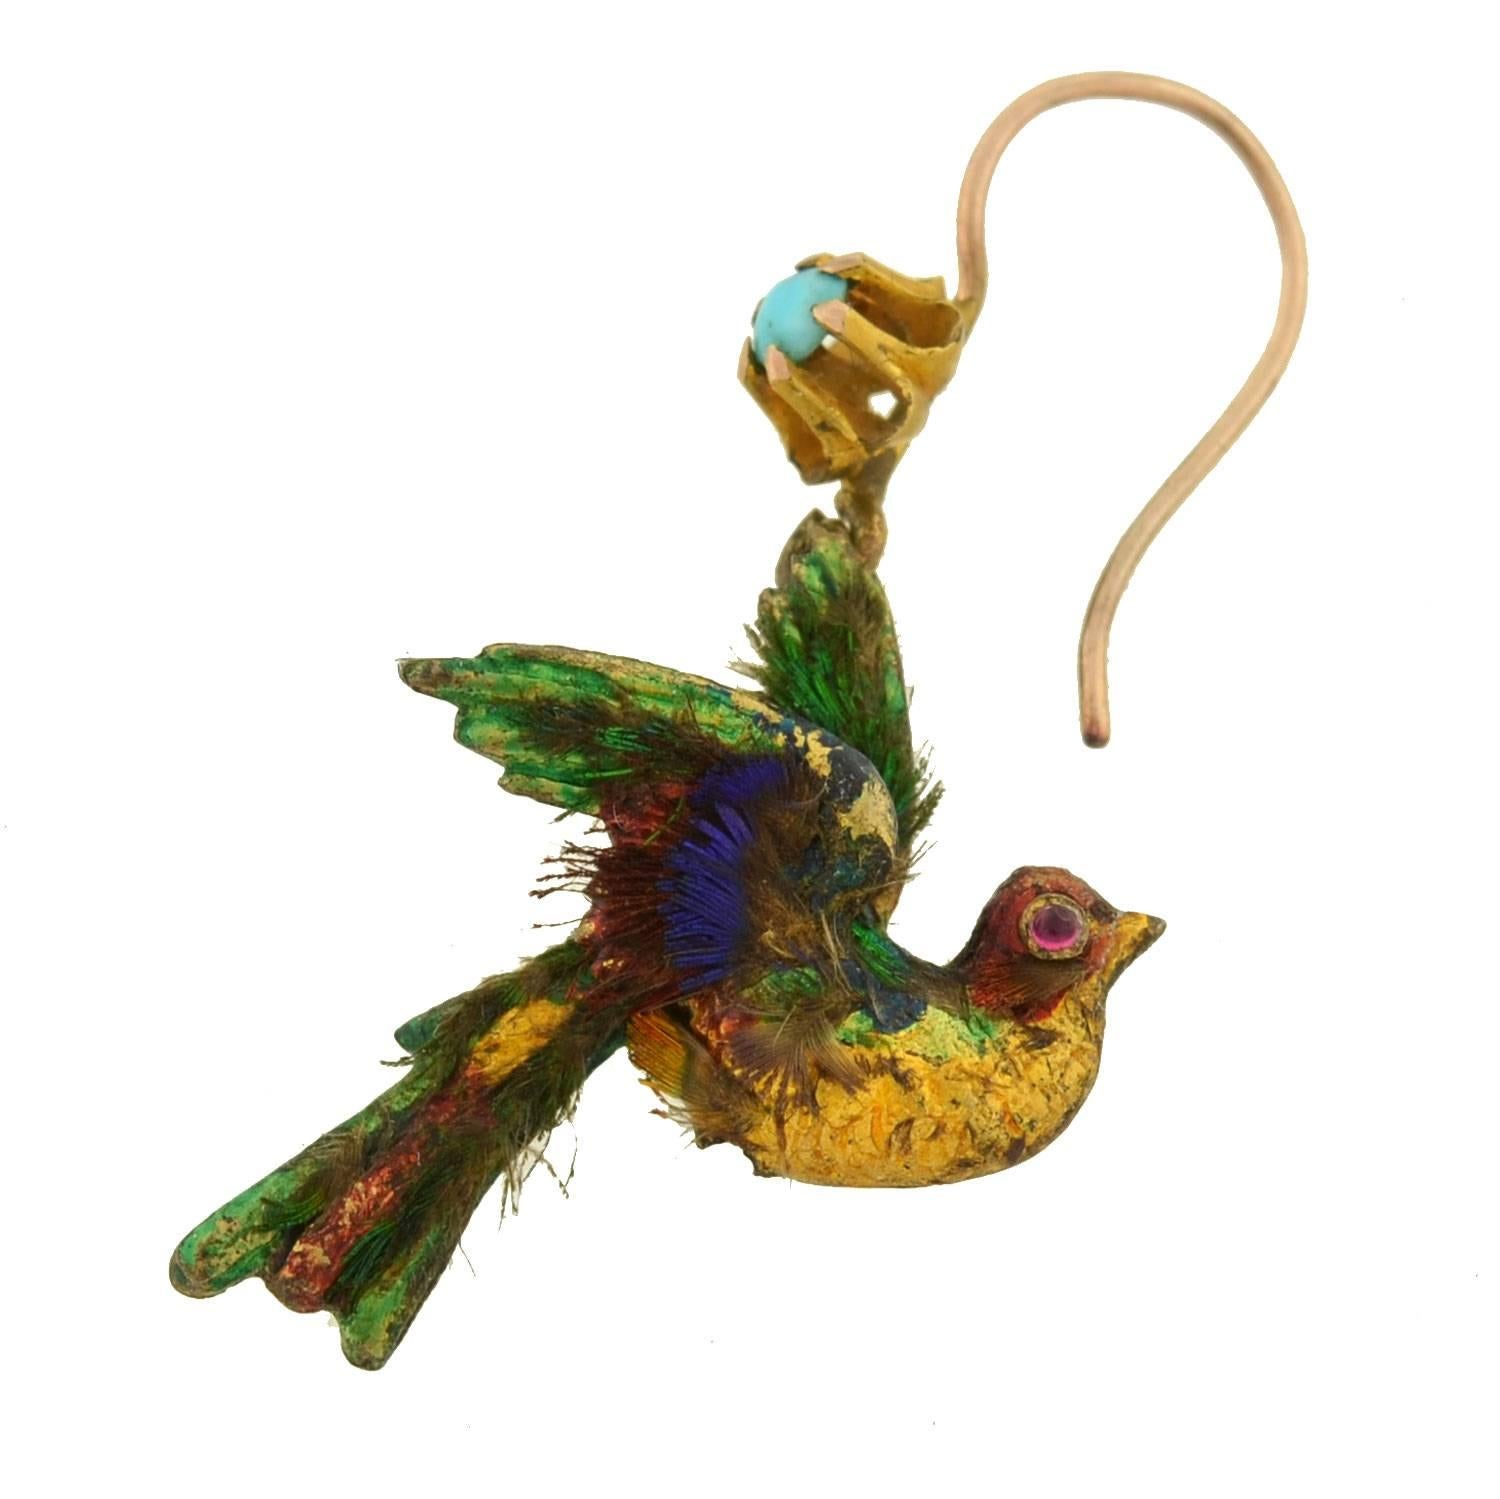 An extremely rare and unusual pair of English earrings from the Victorian (c.1880) era! Each of these artistic earrings is crafted 15kt yellow and carries the shape of an exotic bird. The birds have a 3-dimensional appearance and swing with lovely